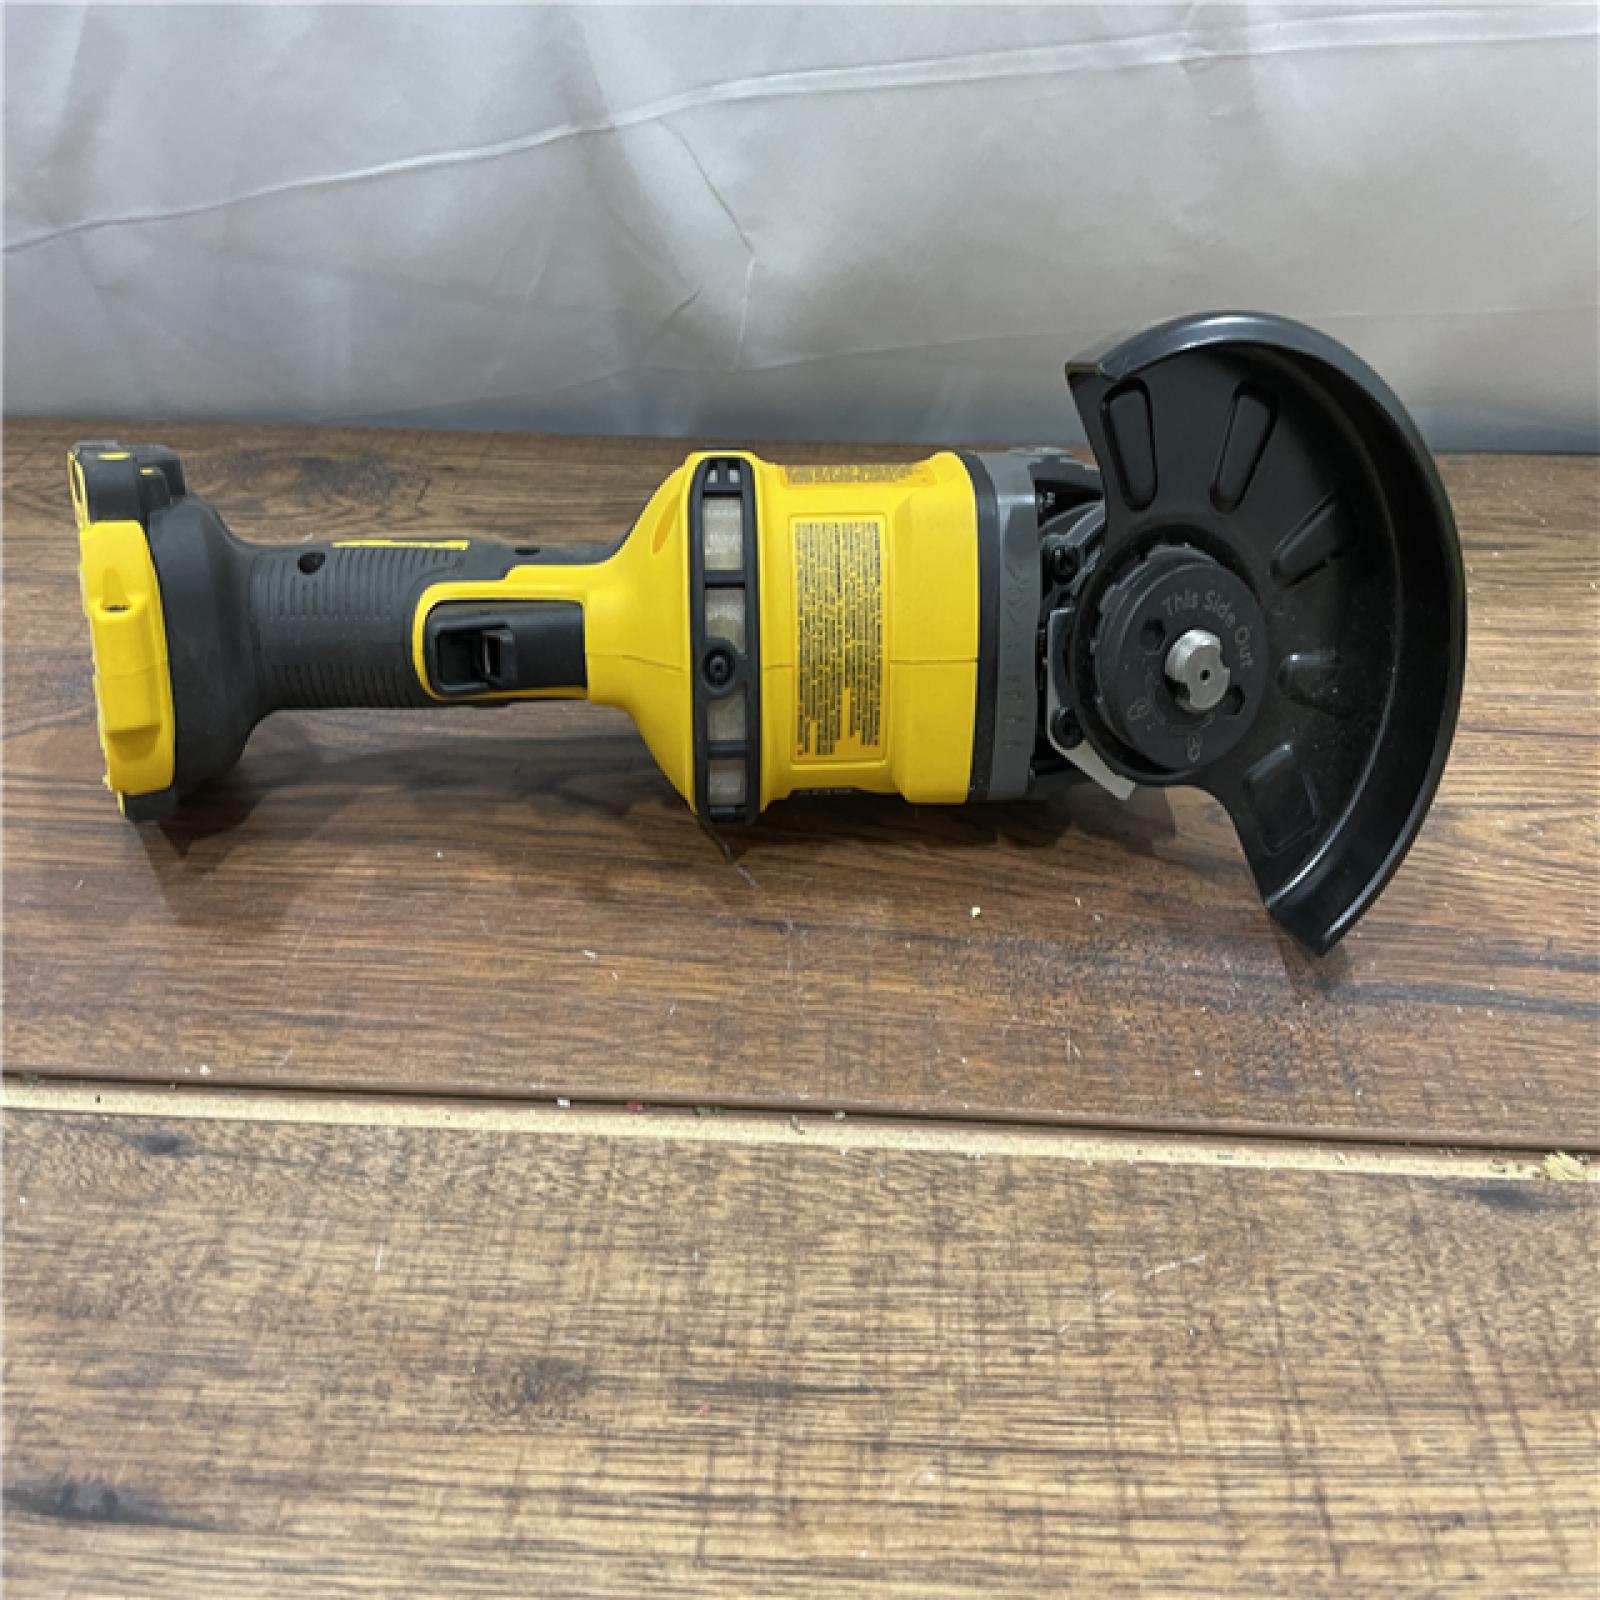 AS-IS DeWalt 60V MAX FLEXVOLT Cordless Brushless 4.5 in. Small Angle Grinder with Kickback Brake (Tool Only)